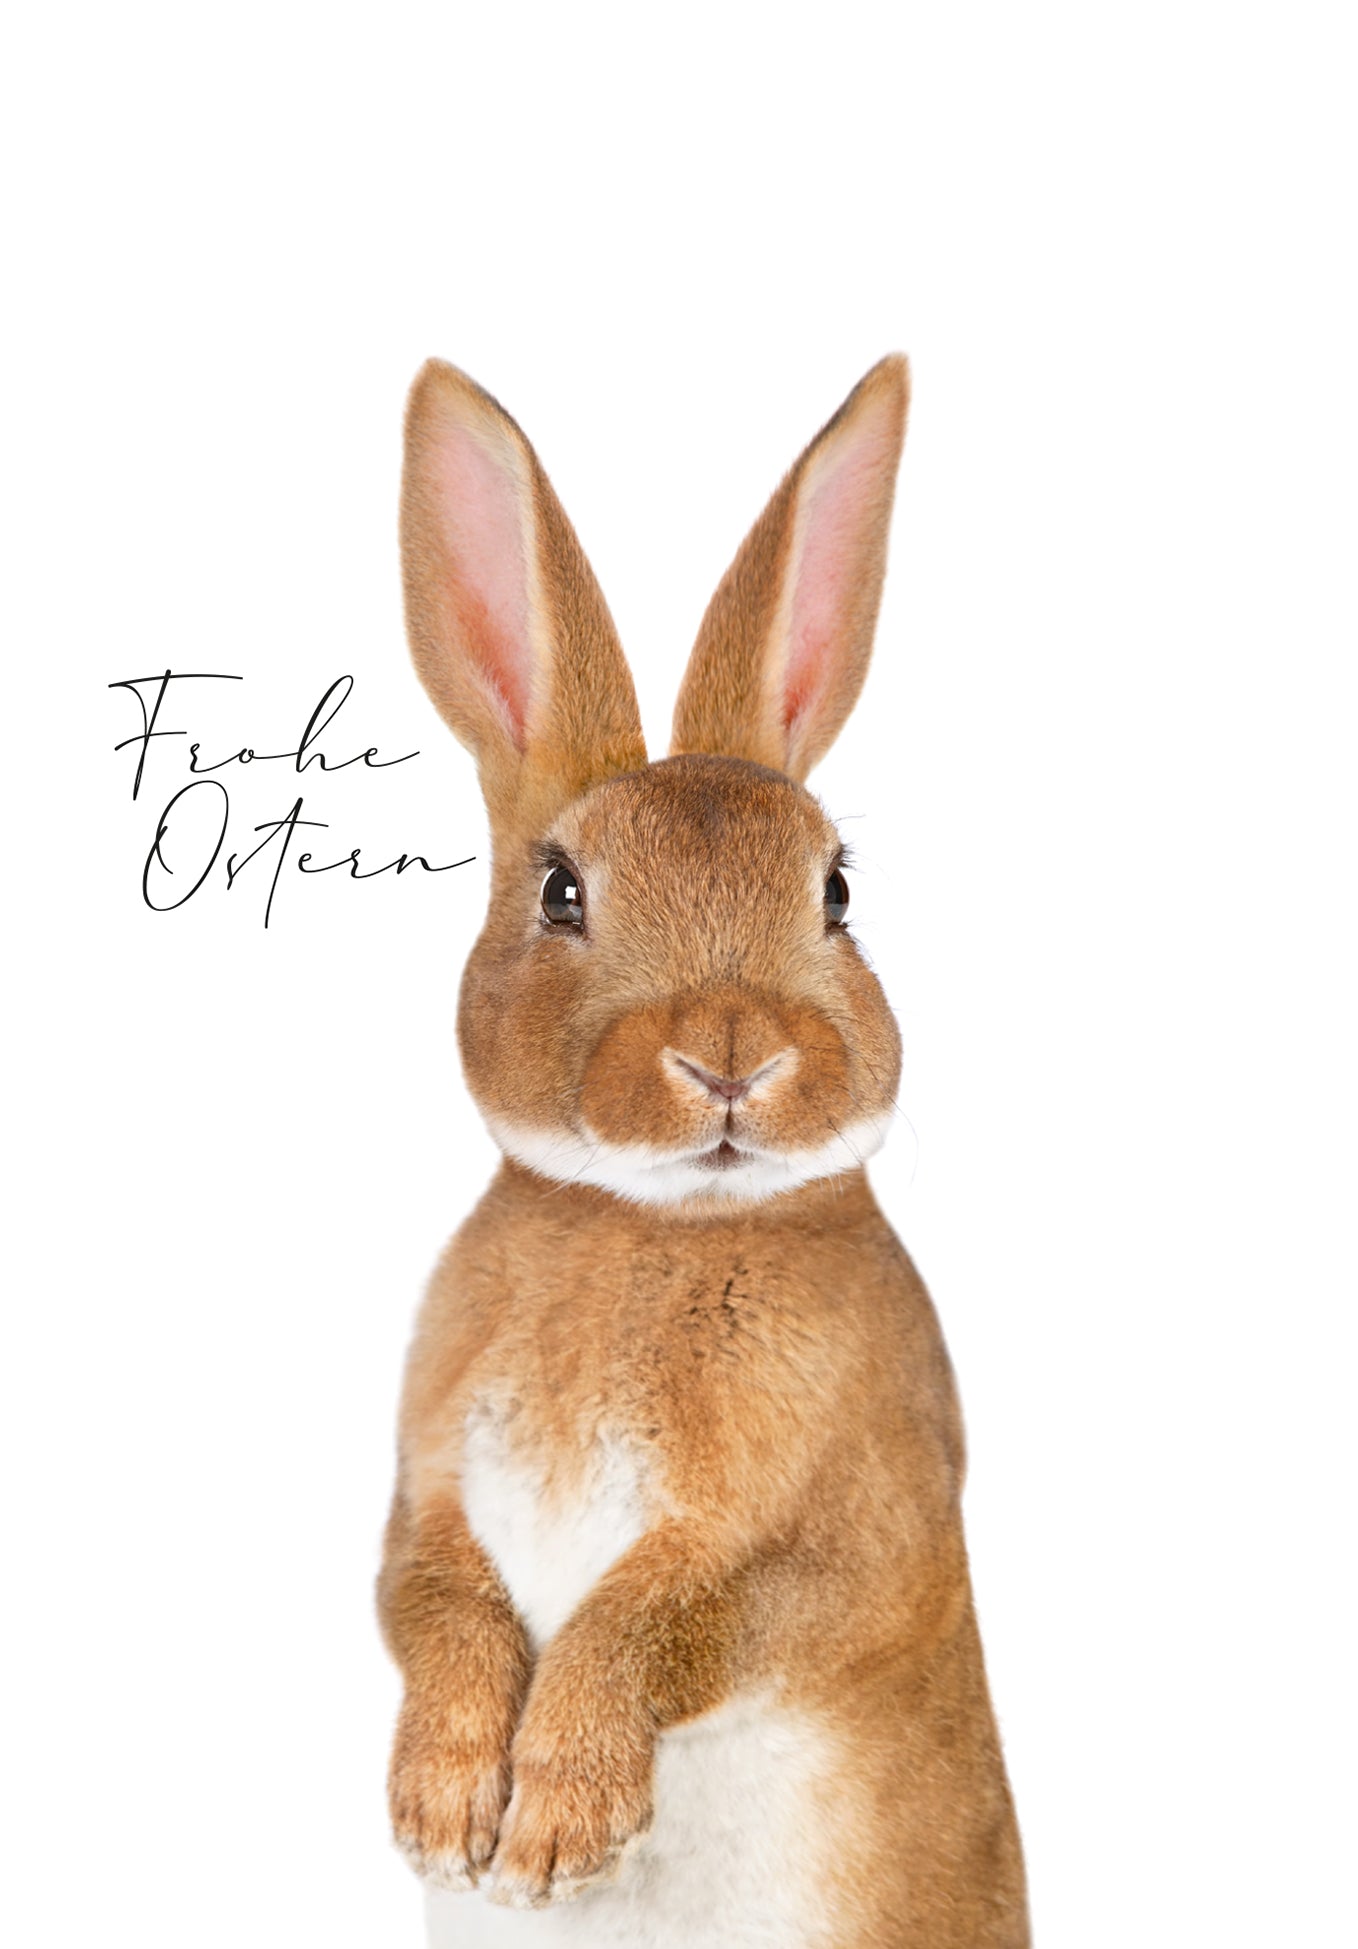 Frohe Ostern - Osterhase (Value)